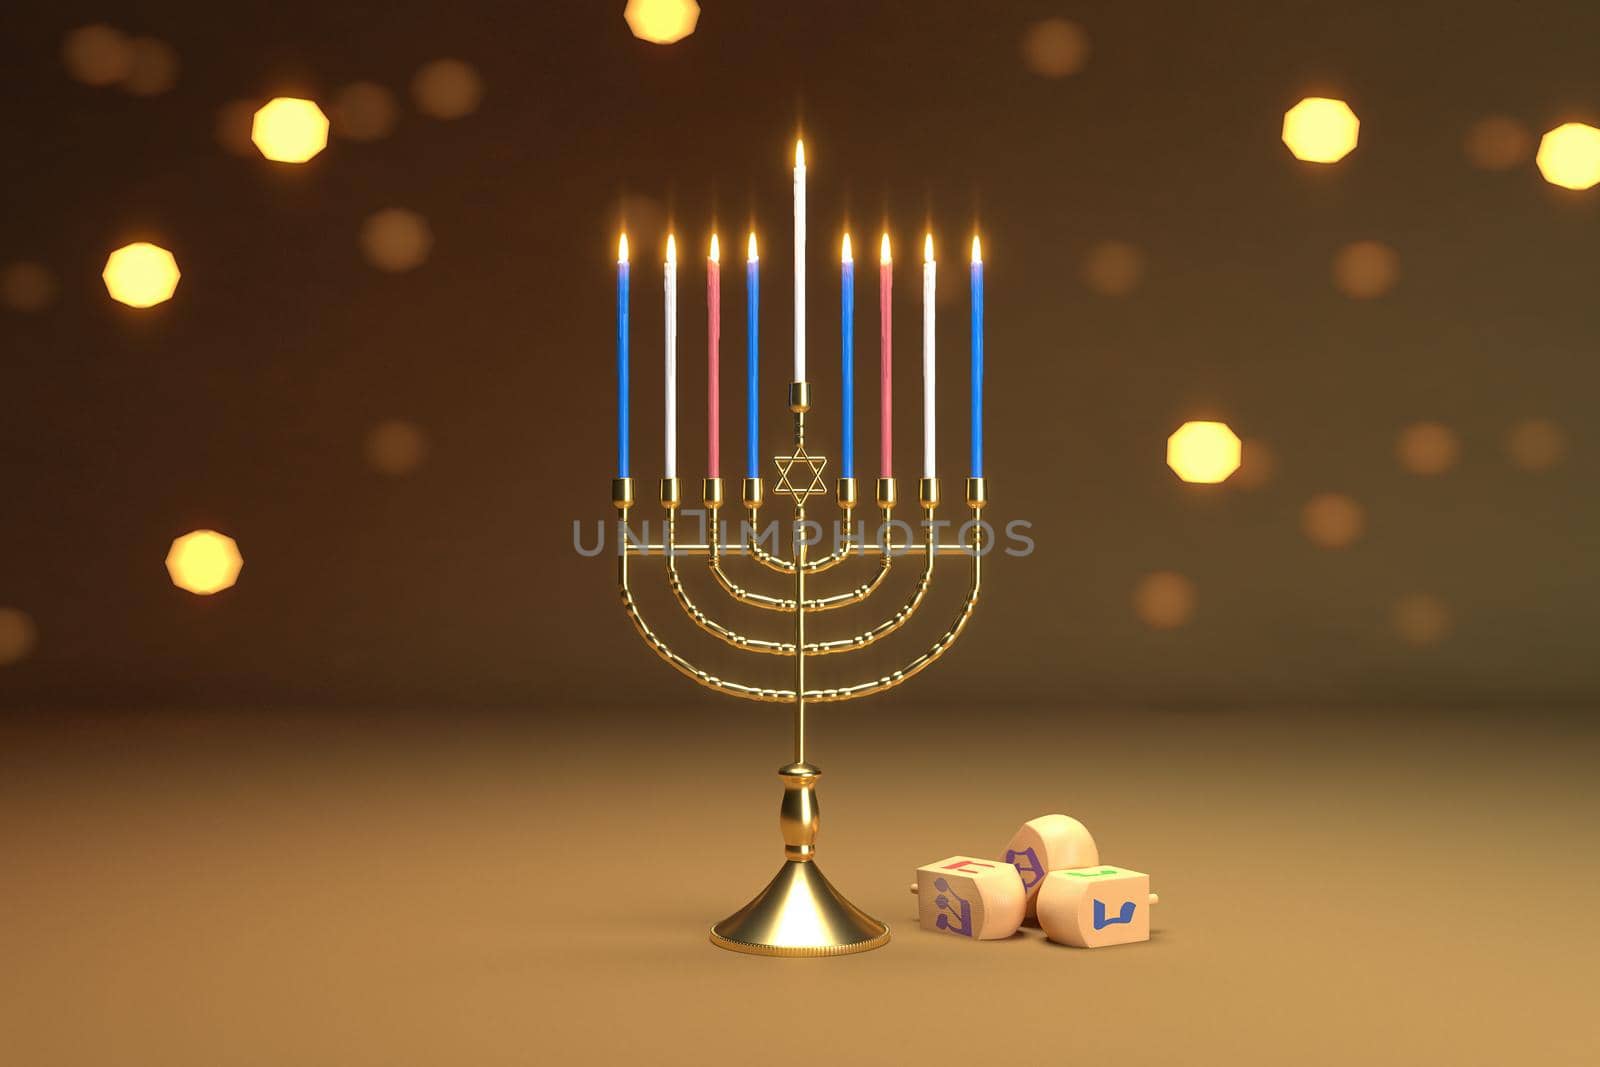 3d rendering Image of Jewish holiday Hanukkah with  menorah or traditional Candelabra and wooden dreidels or spinning top on a  bokeh background.